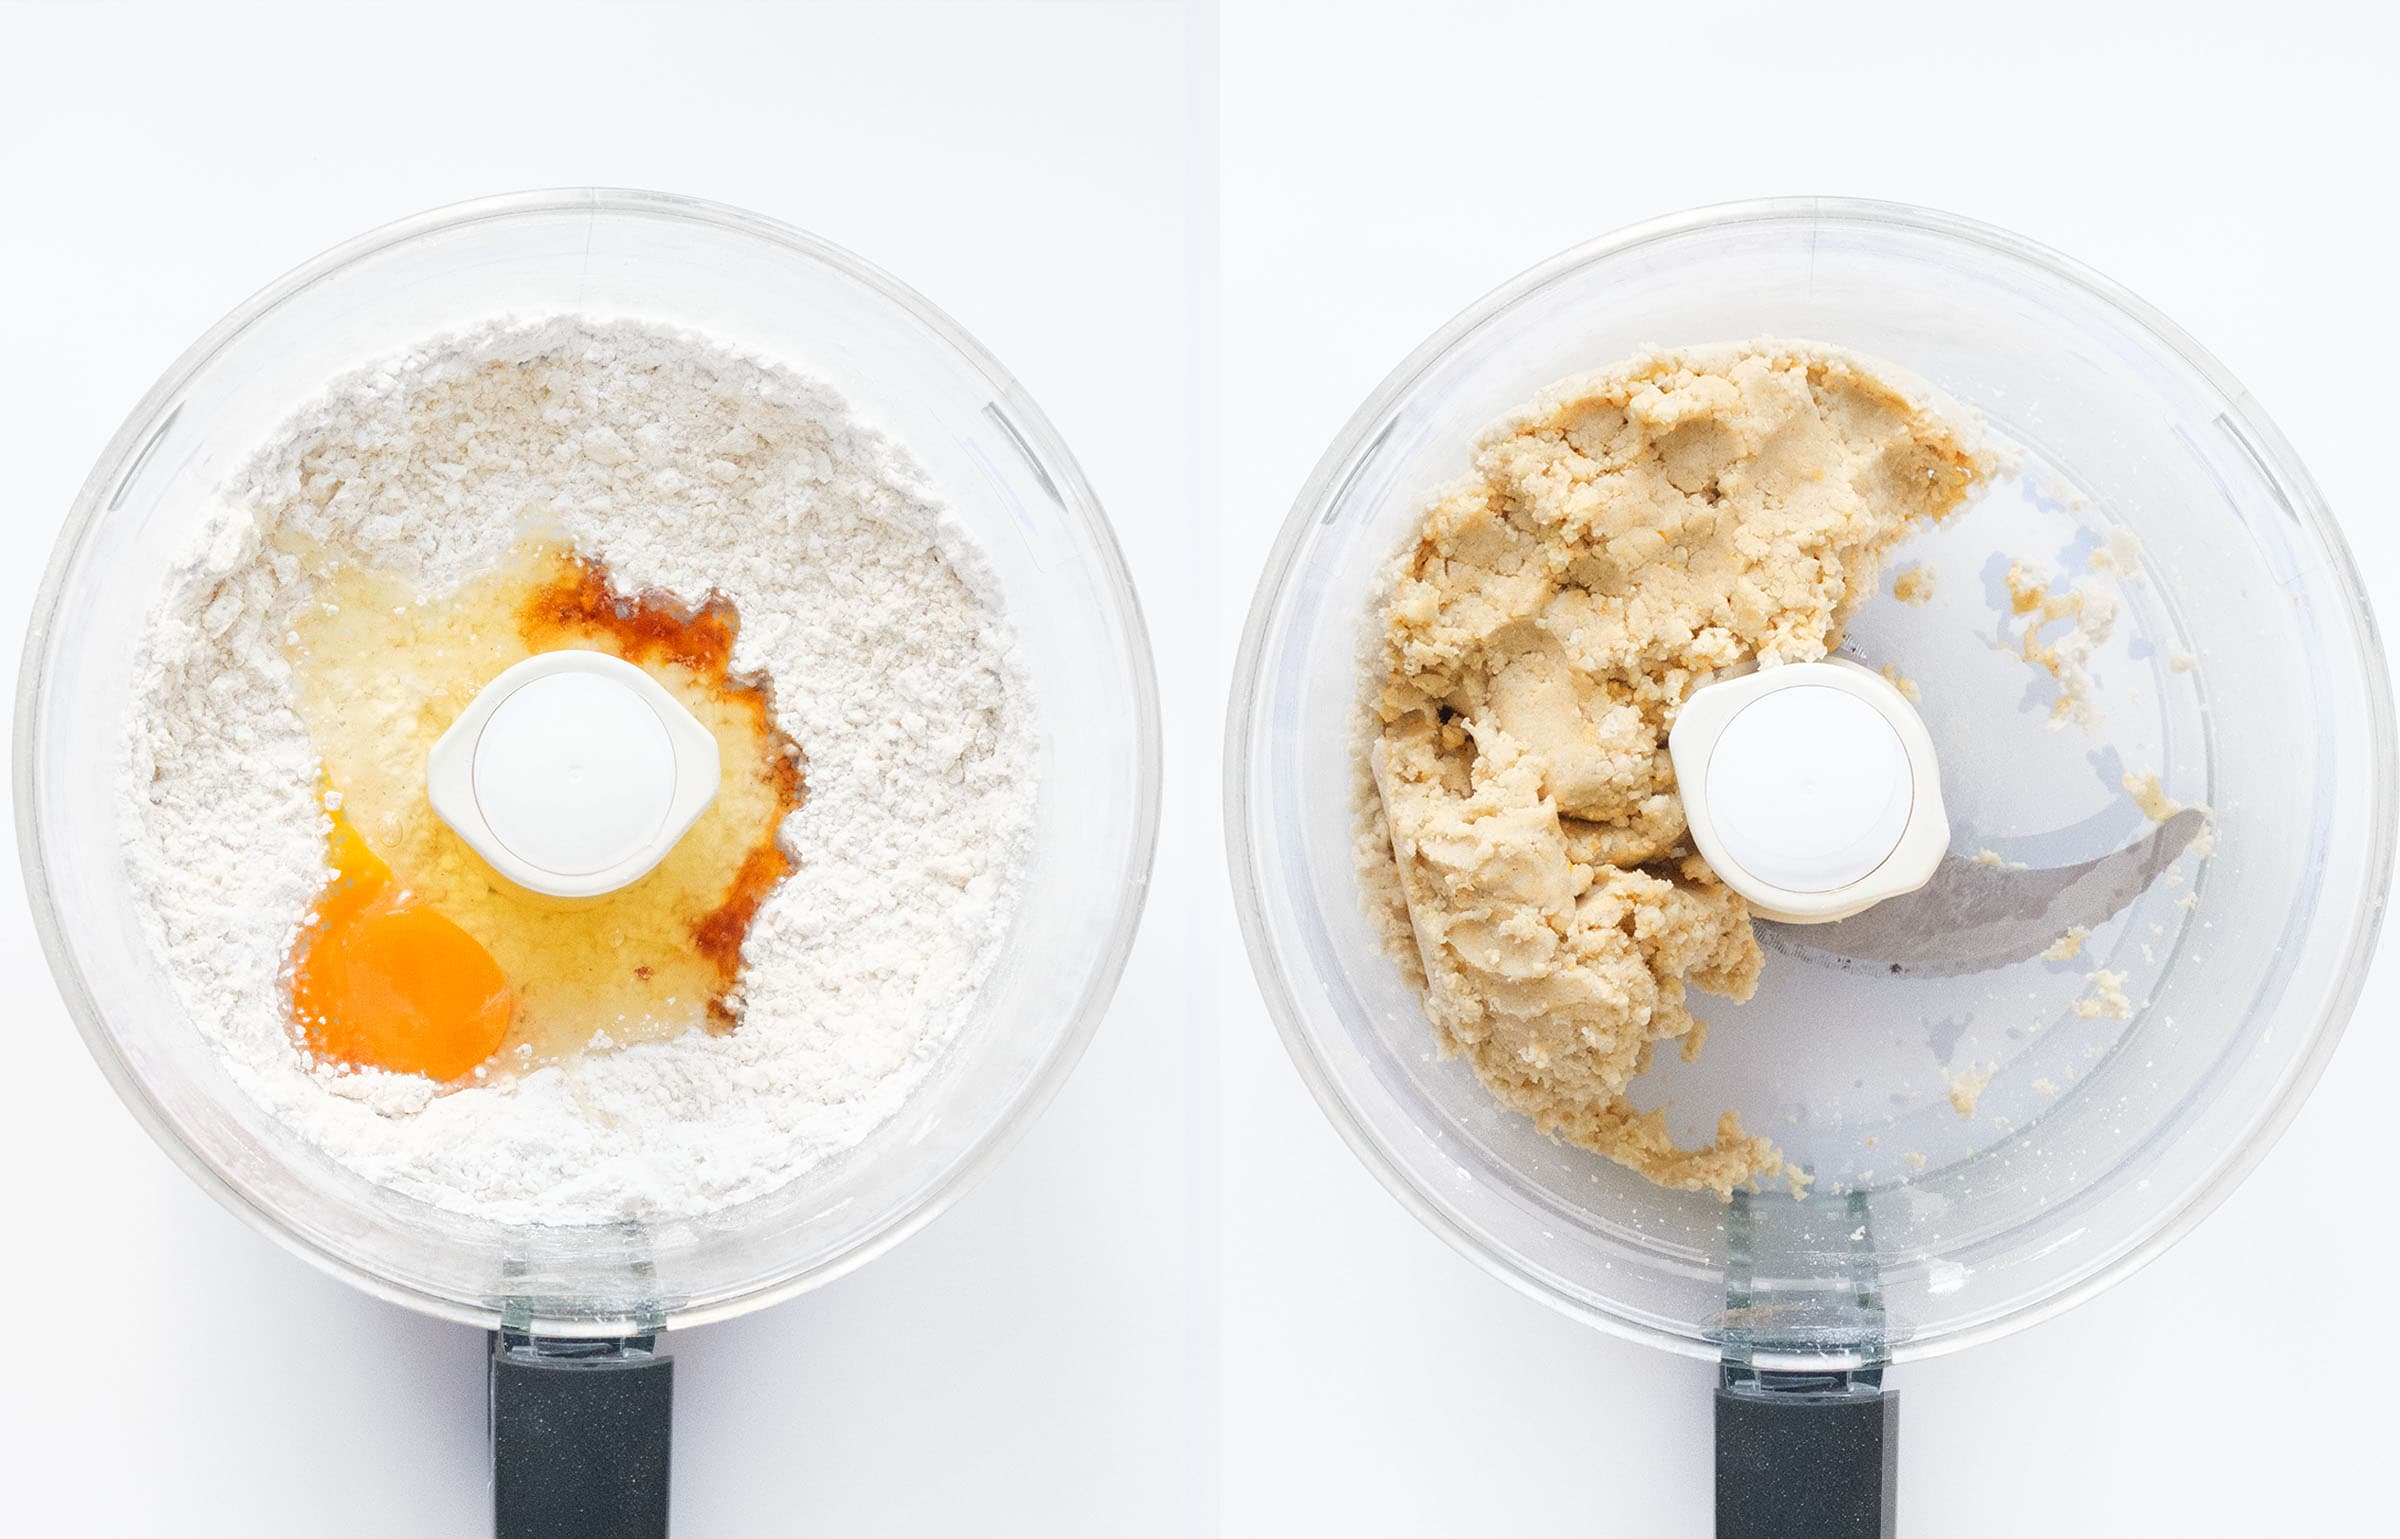 Top view of a food processor showing how the egg turns the dry ingredients into a cookie dough.